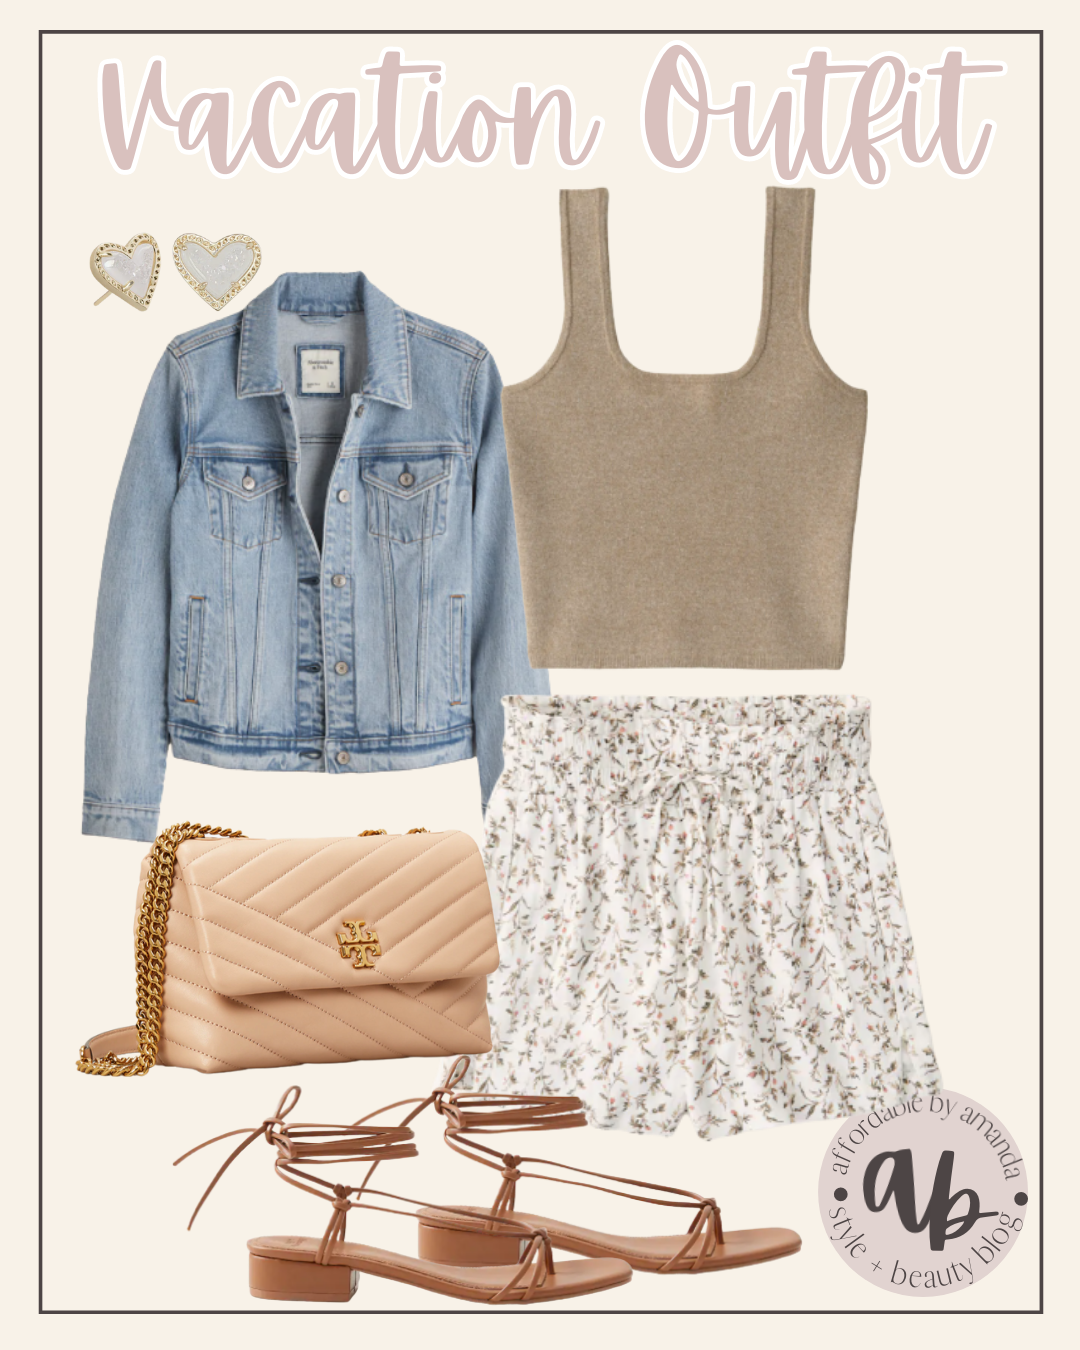 Vacation Outfit Ideas 2021 - Affordable by Amanda